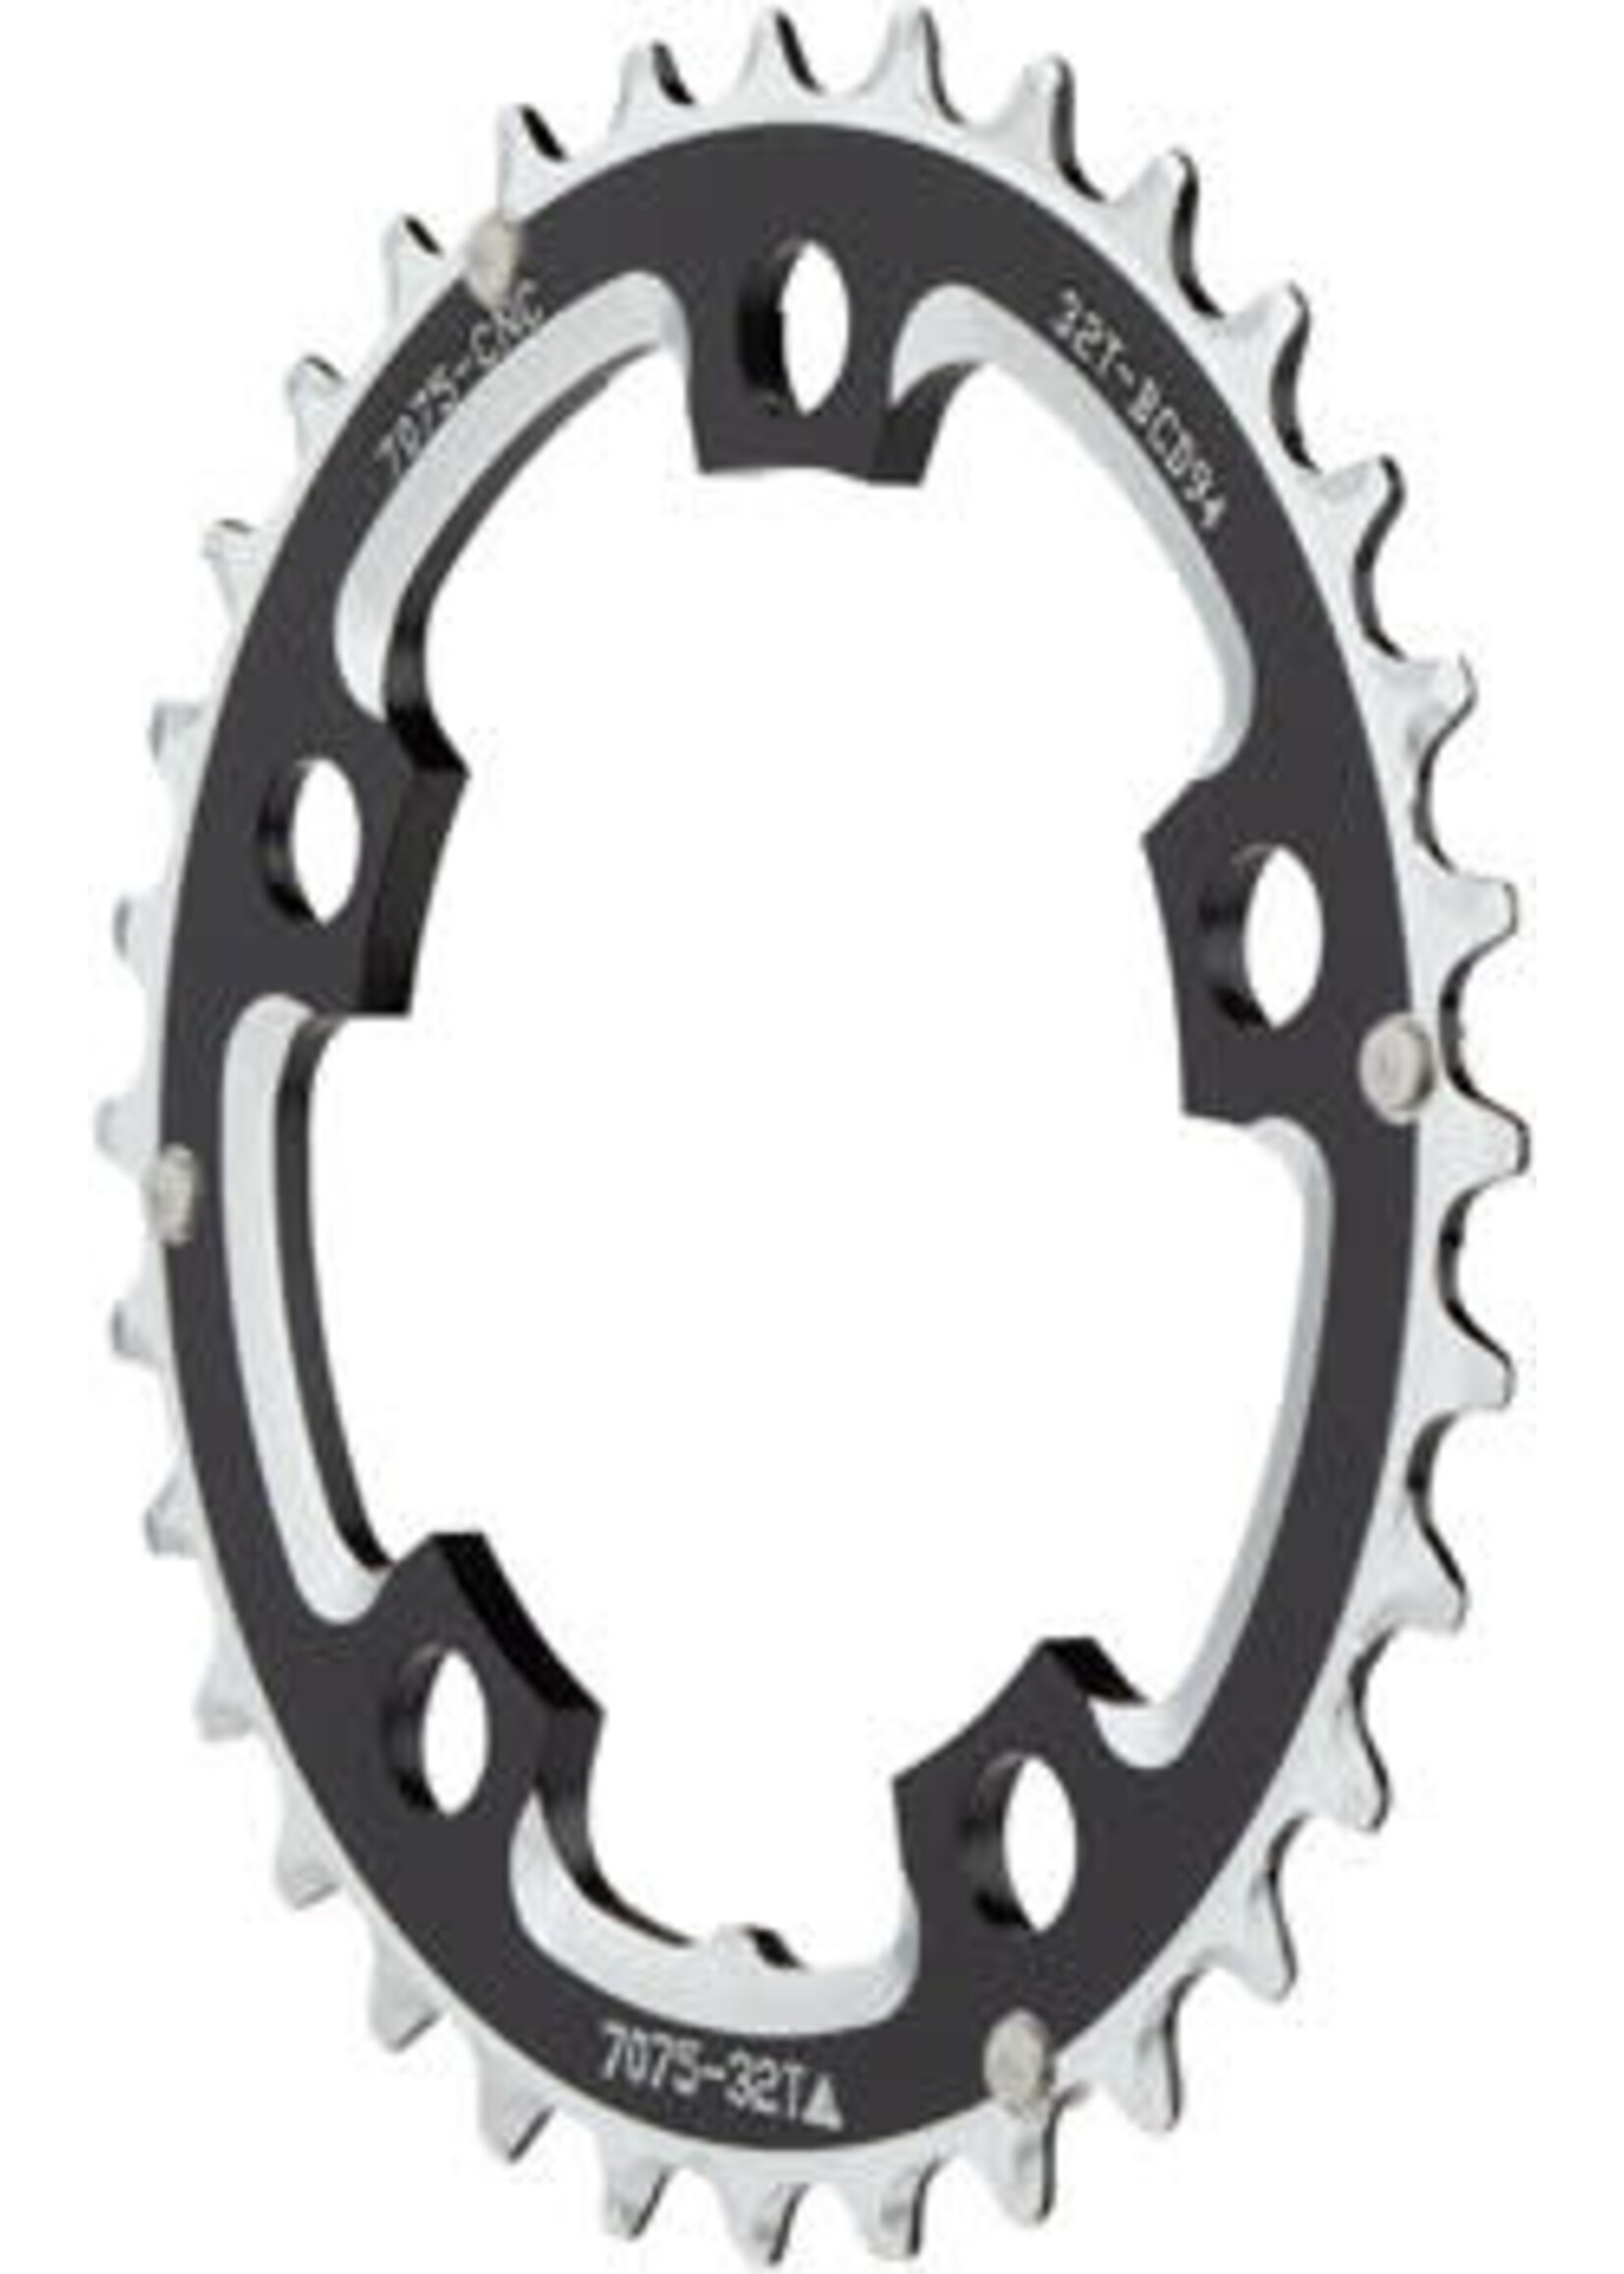 Dimension Dimension Multi Speed Chainring - 32T, 94mm BCD, Middle, Black